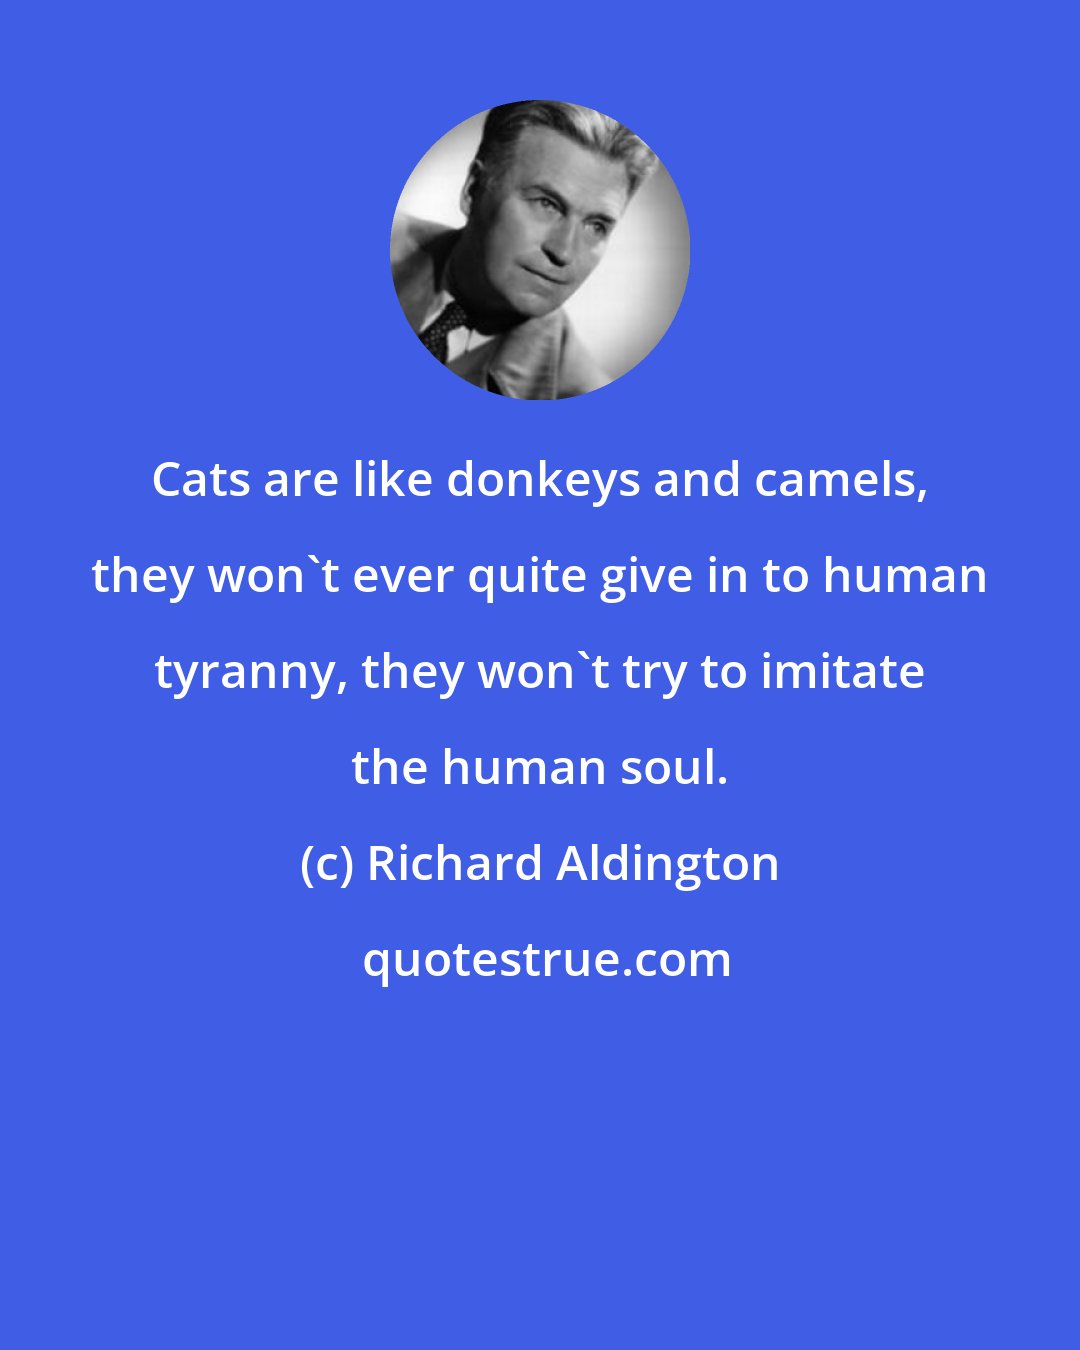 Richard Aldington: Cats are like donkeys and camels, they won't ever quite give in to human tyranny, they won't try to imitate the human soul.